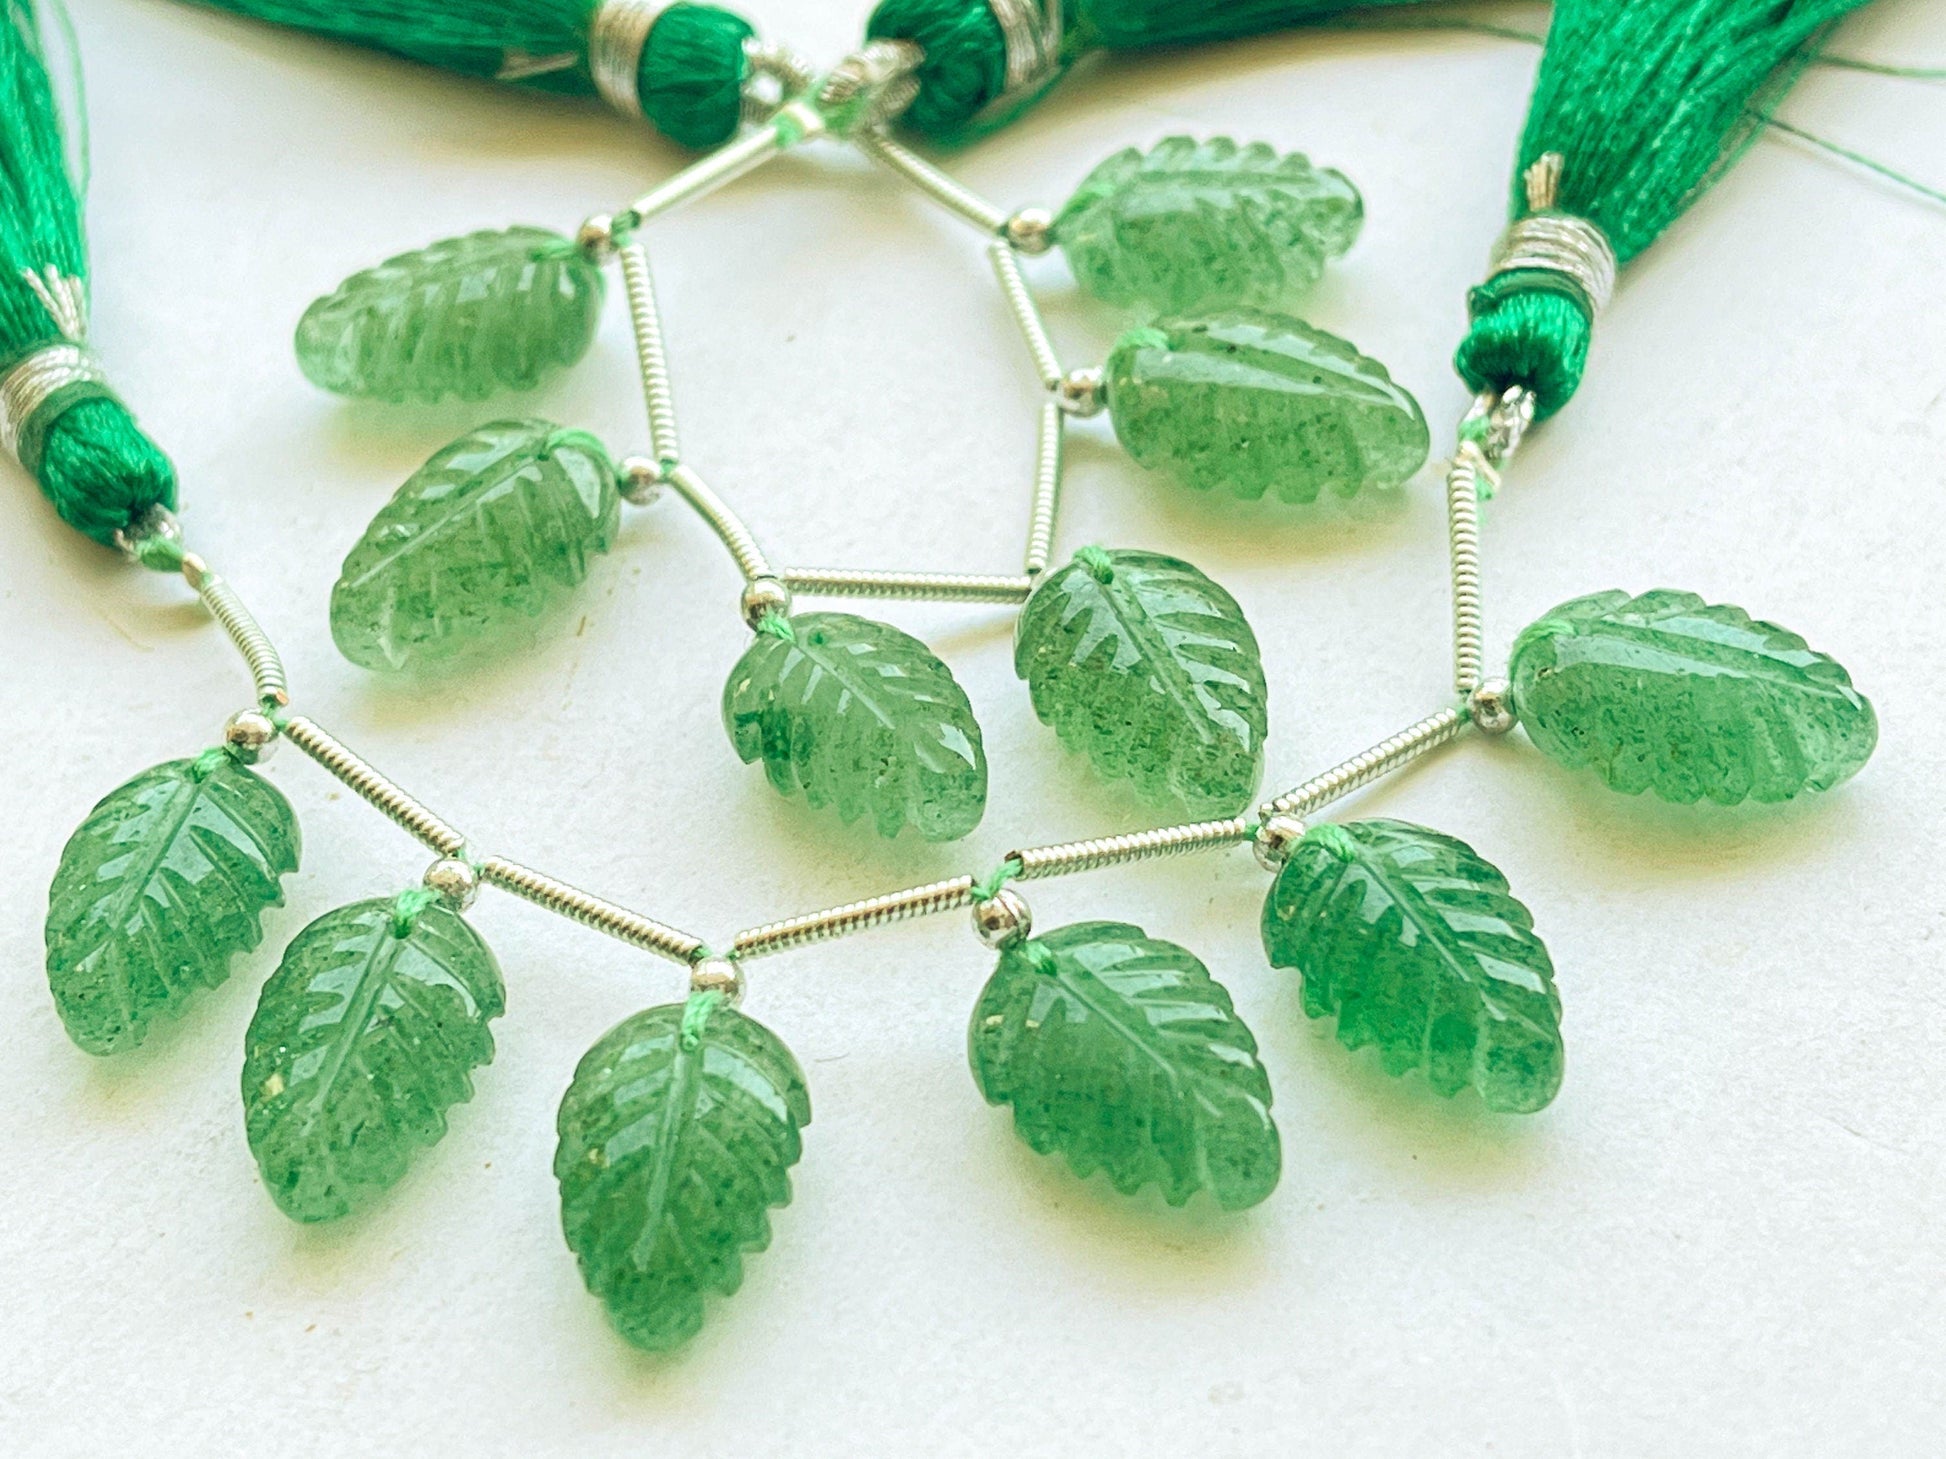 10 Pieces Green Strawberry Quartz Leaf carved Beads Beadsforyourjewelry